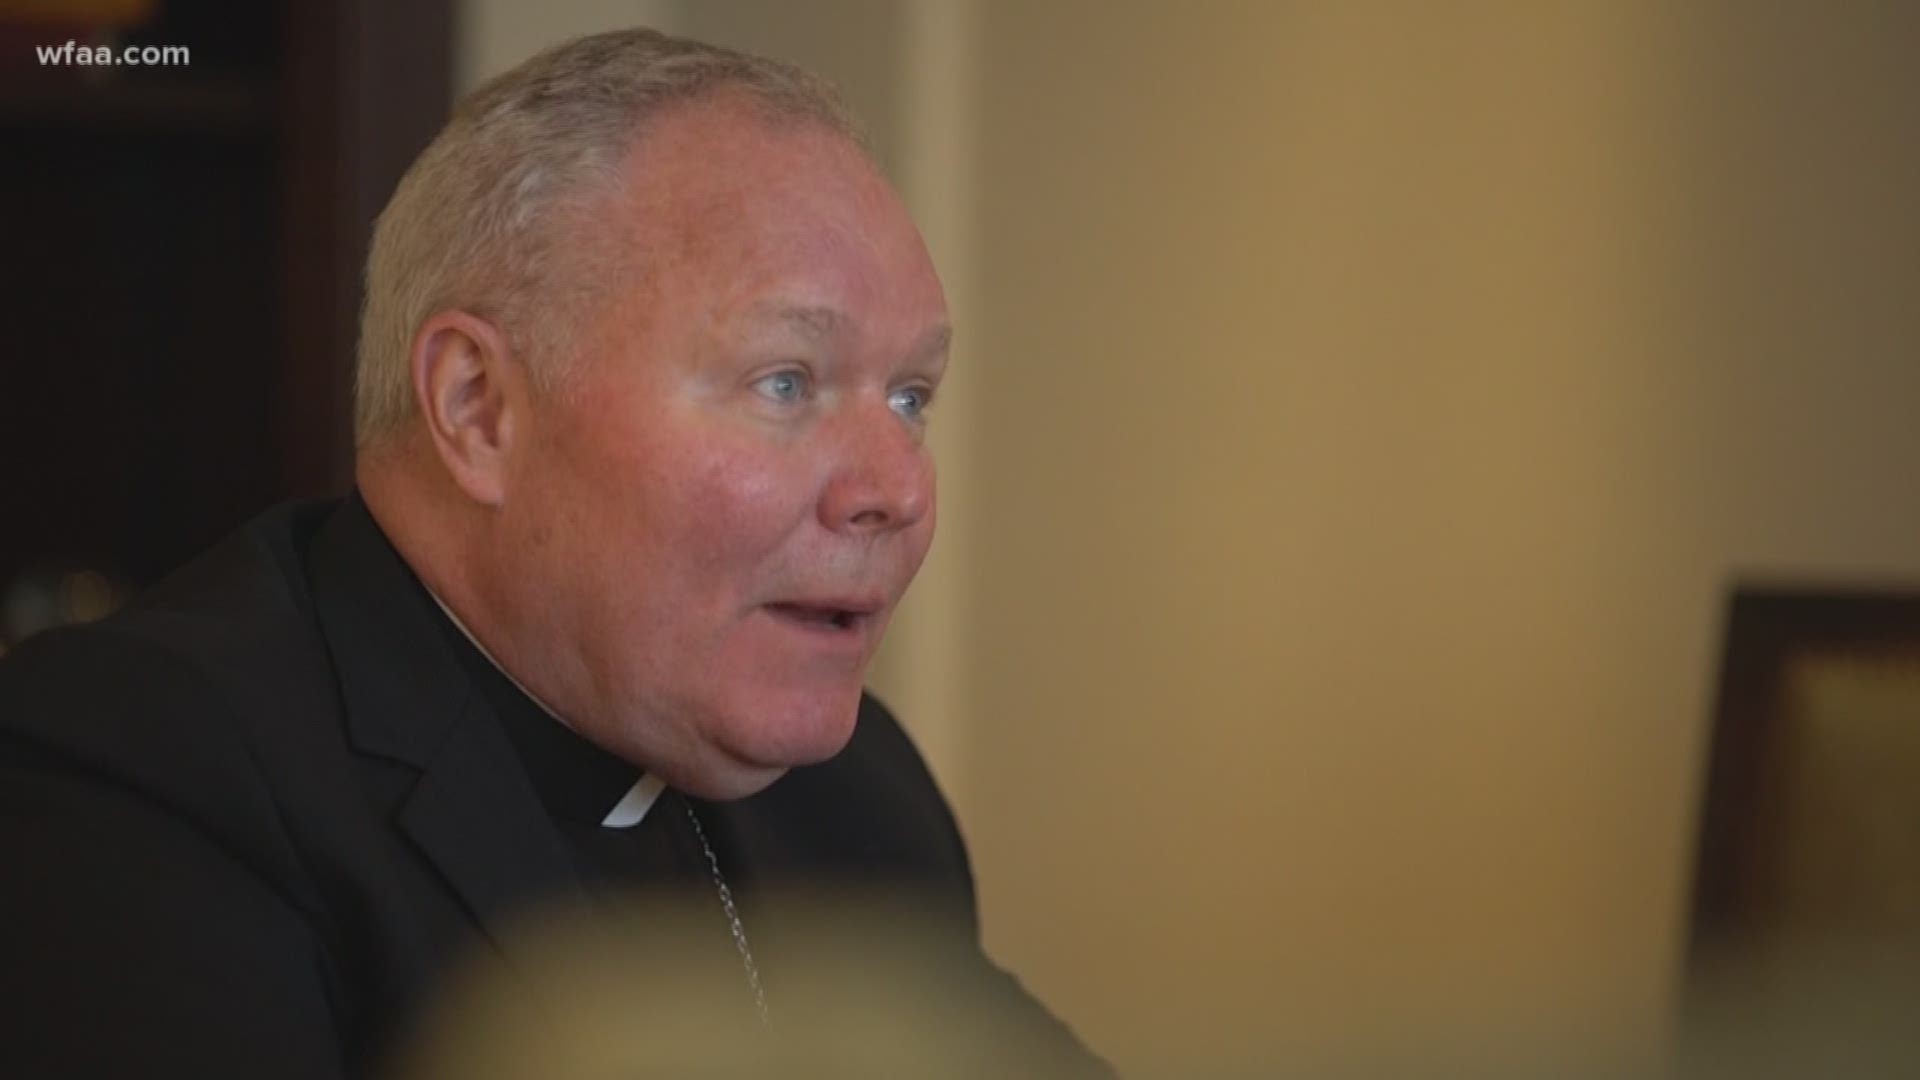 Pennsylvania priests accused of sexual abuse